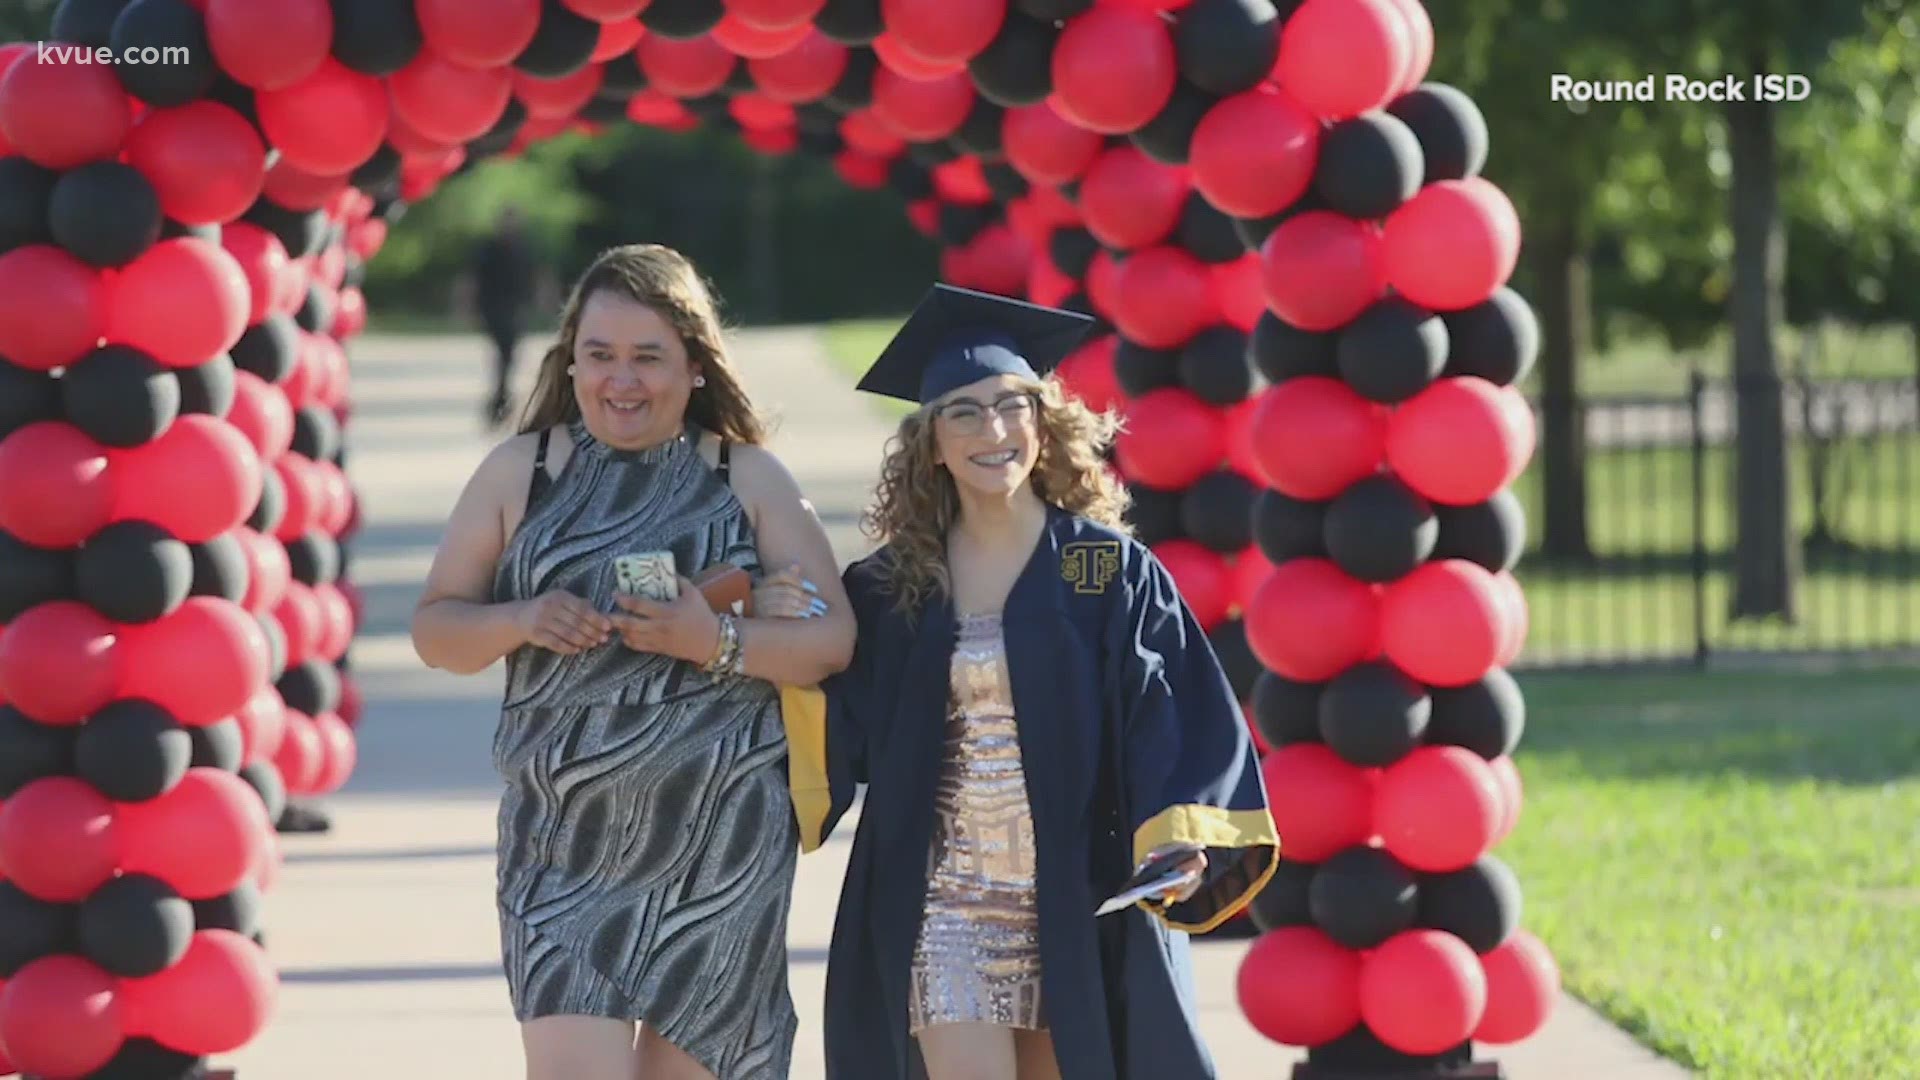 Round Rock ISD seniors are working to have a traditional graduation ceremony.